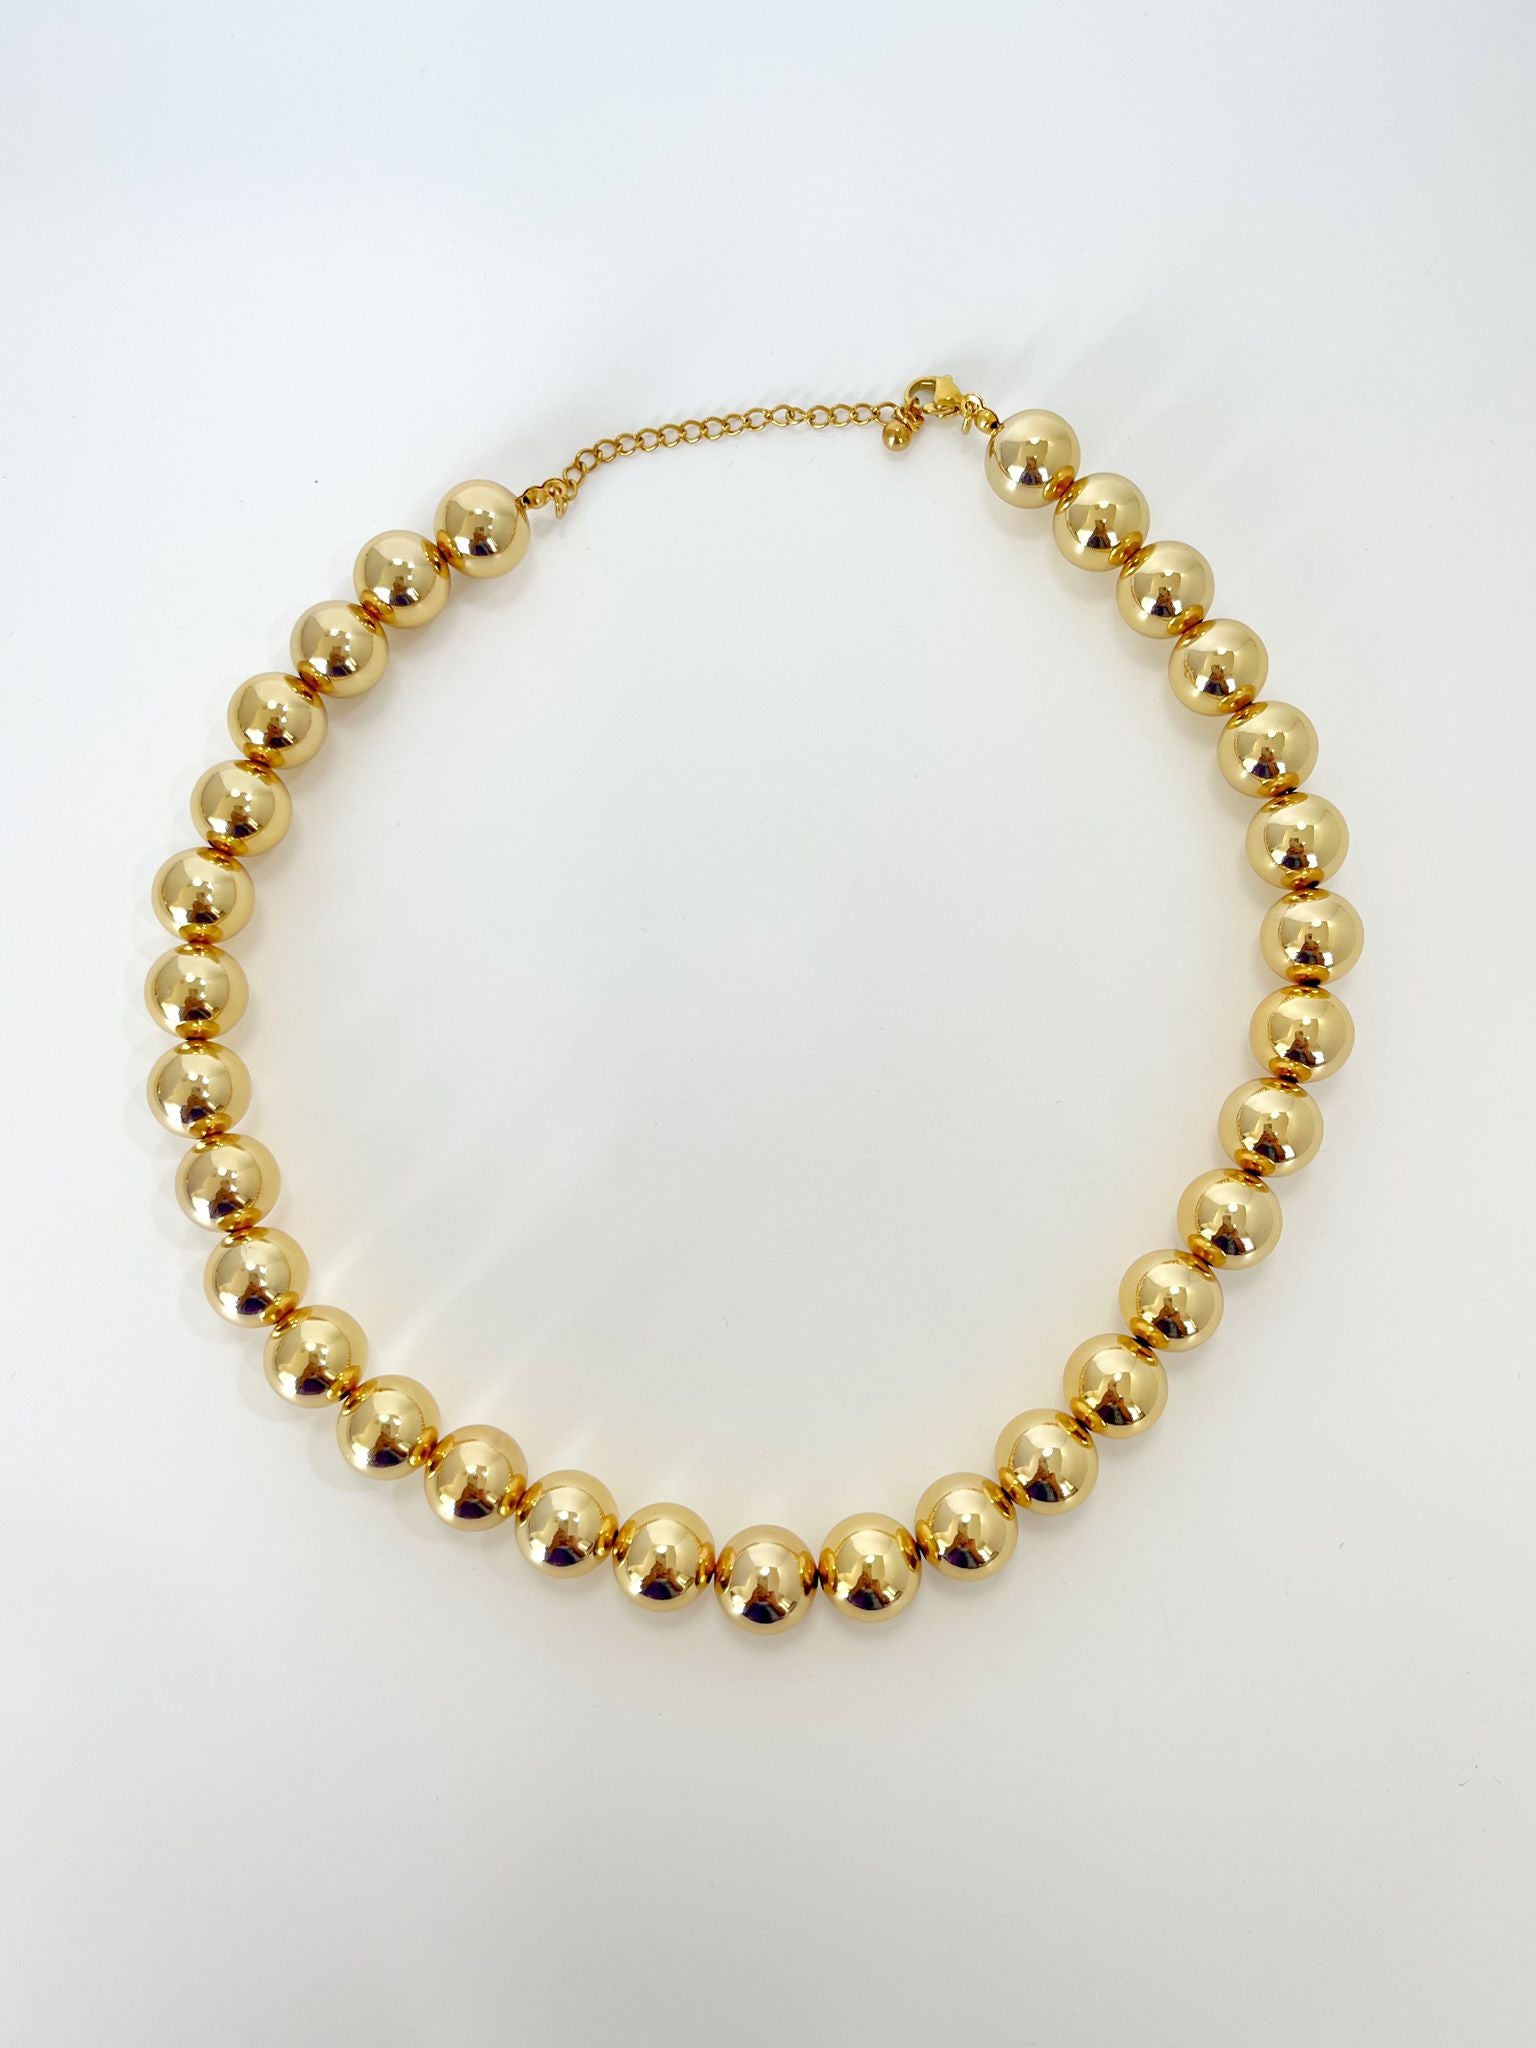 Large gold necklace